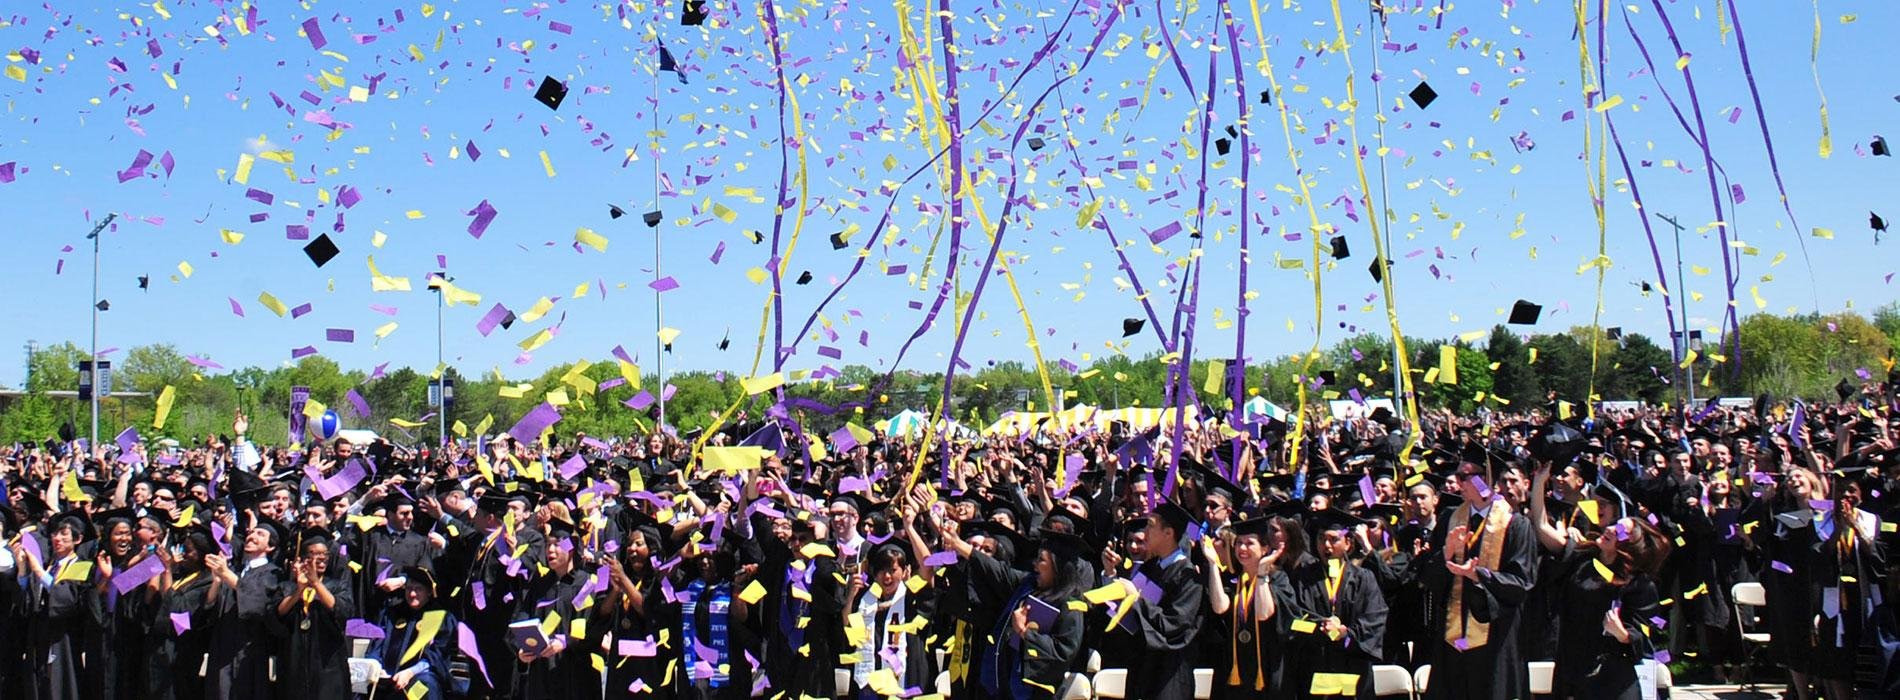 Undergraduate students at commencement showered in confetti